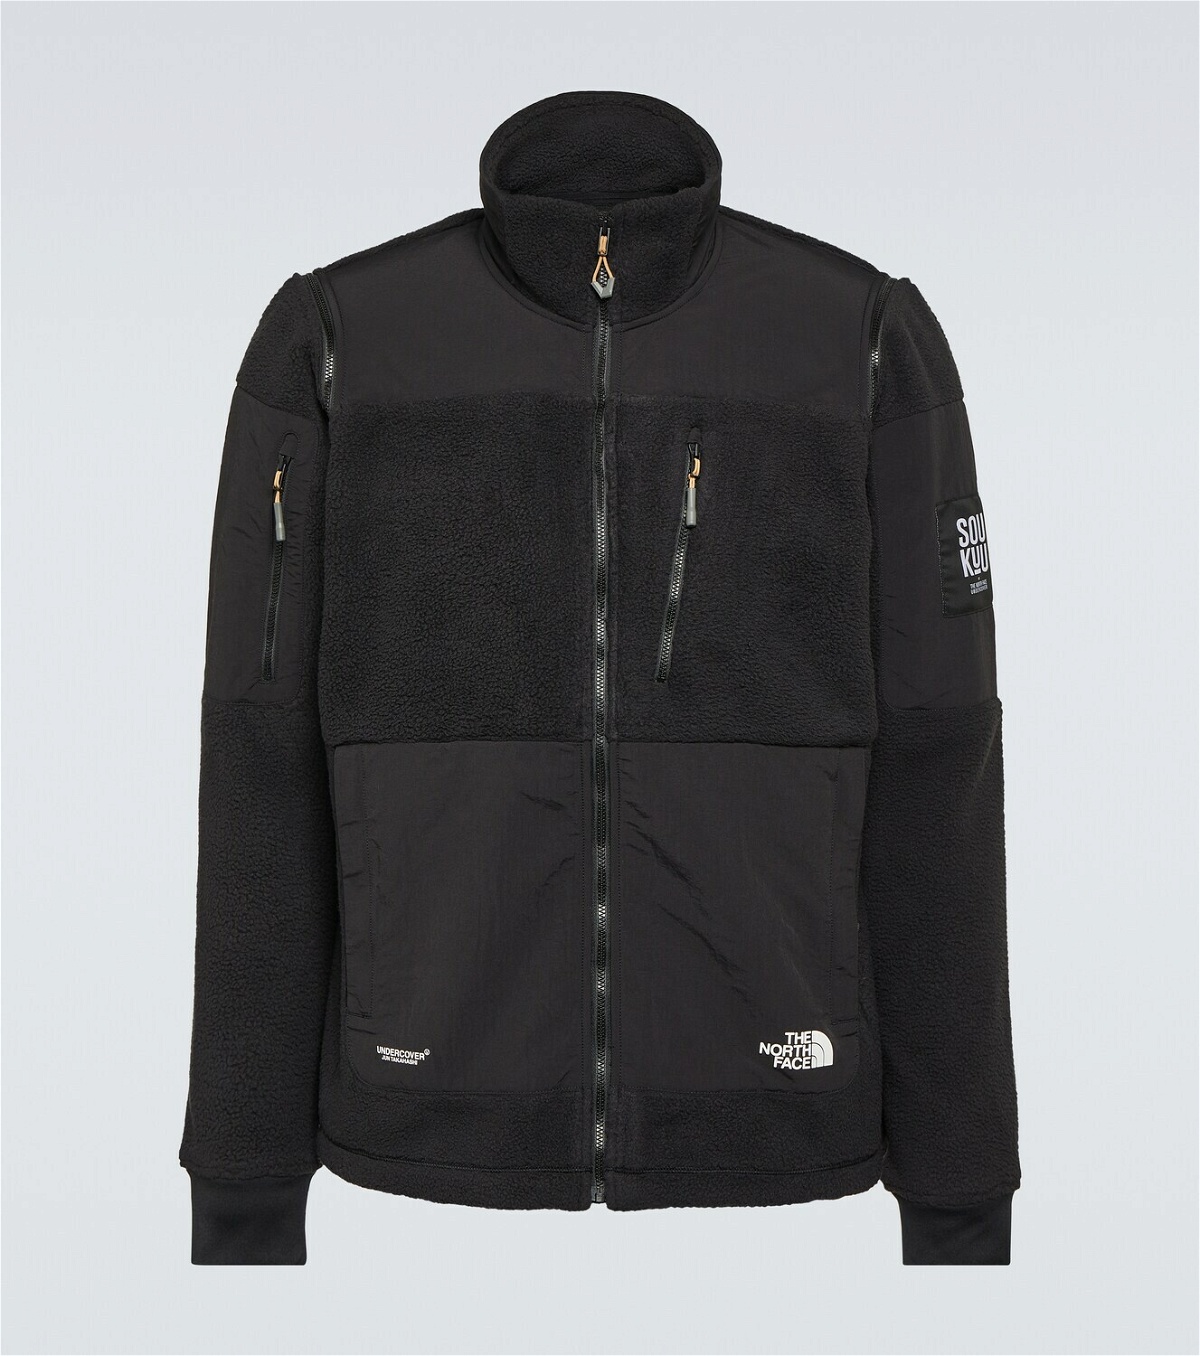 Hydrenaline Jacket in Grey The North Face